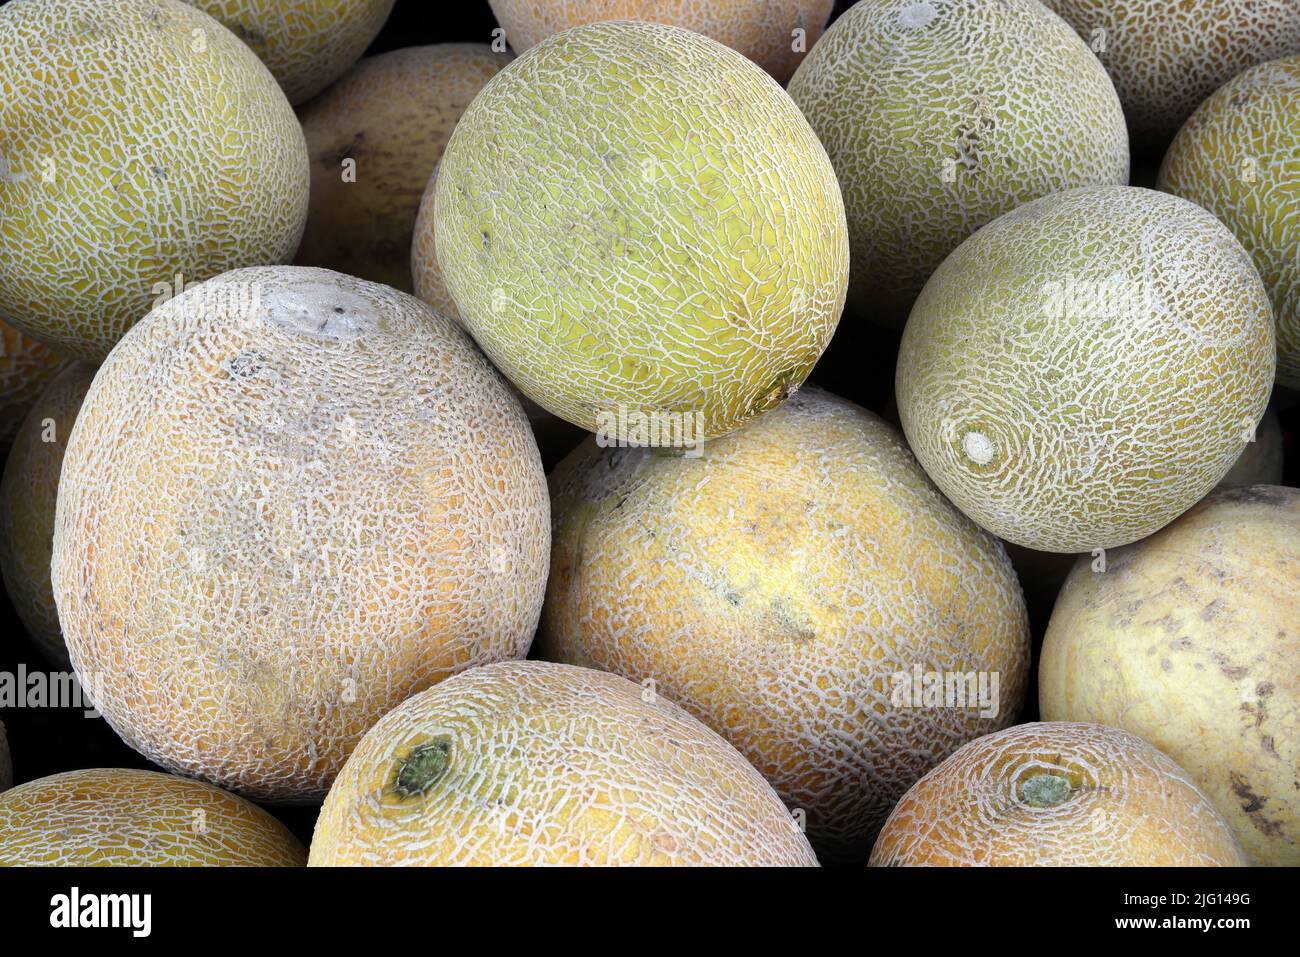 Melons in market stall Osa Peninsula, Costa Rica                     March Stock Photo